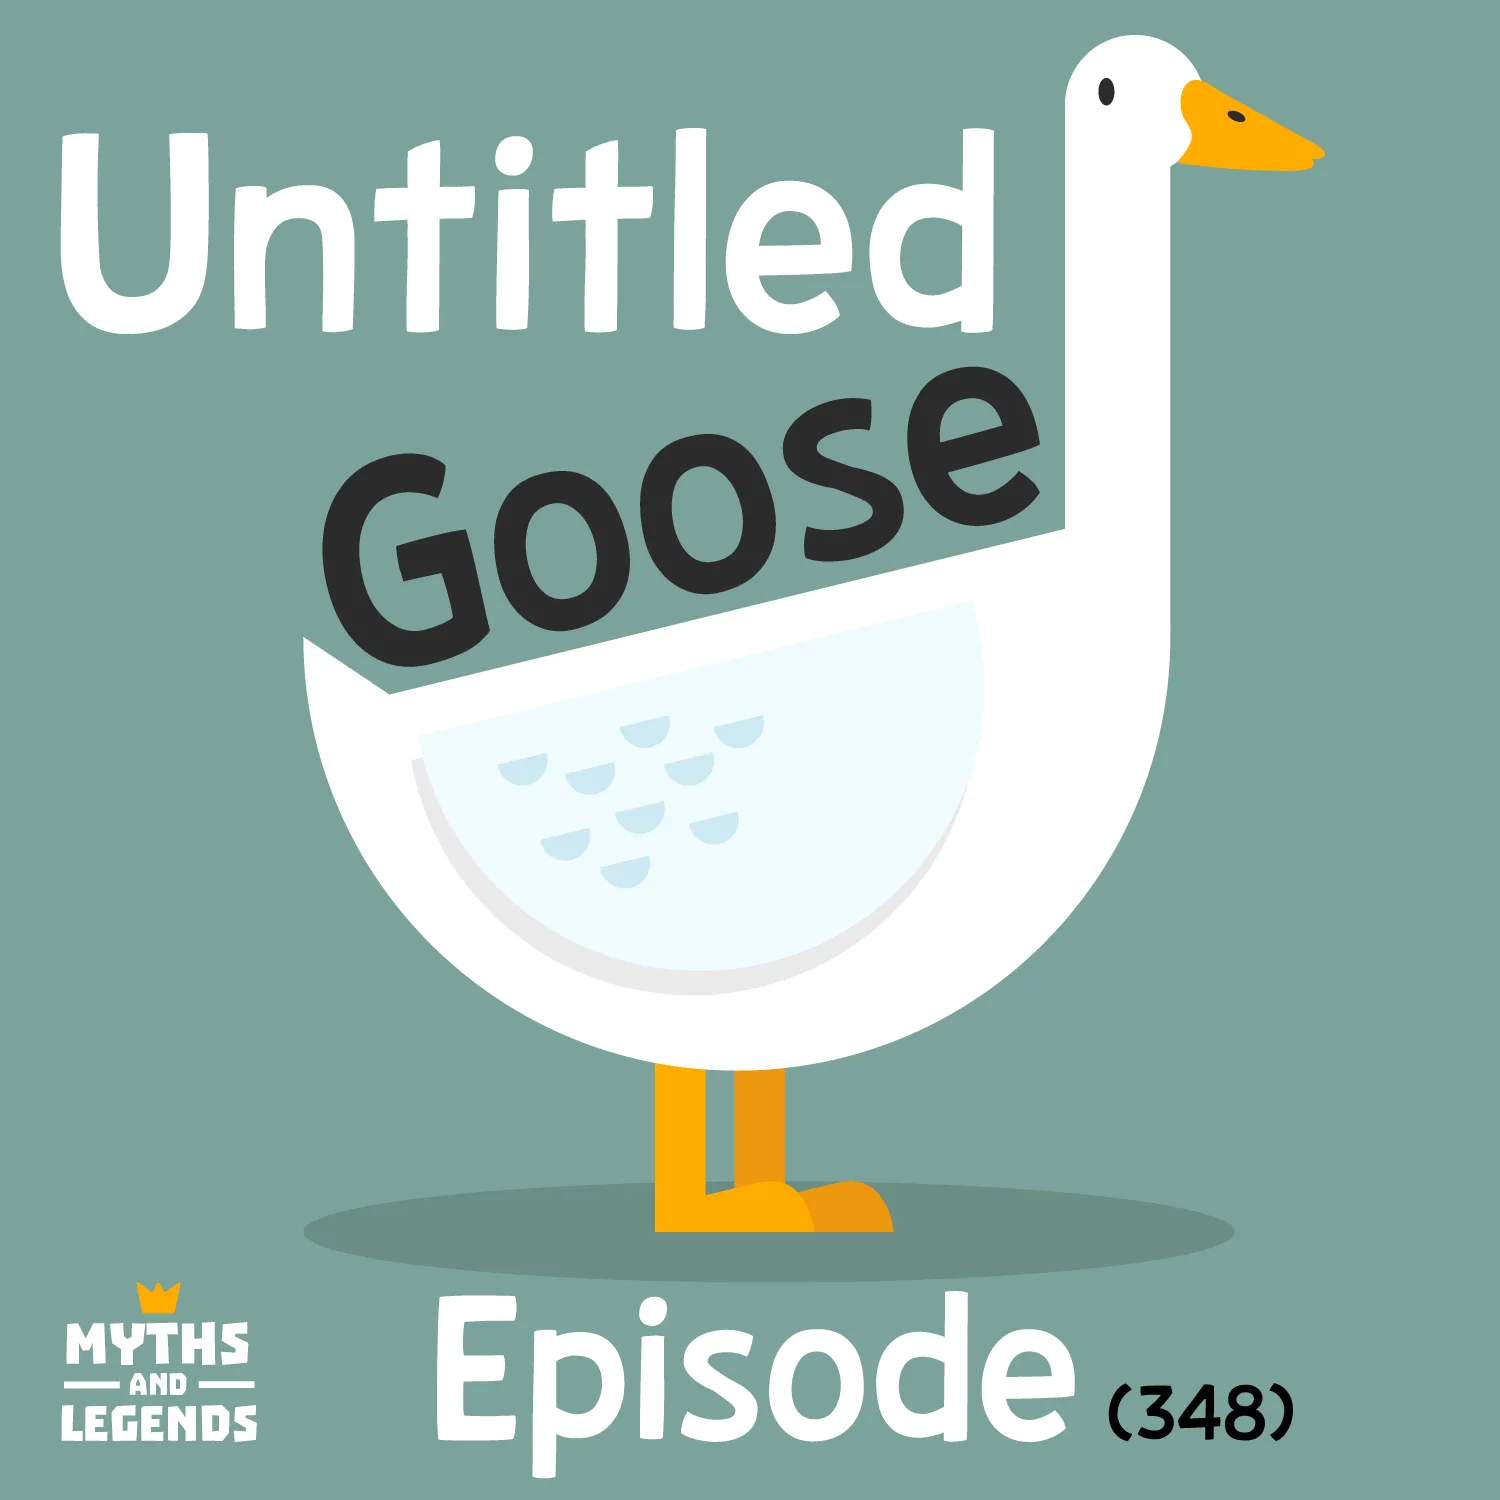 A white cartoon-style goose stands against a green background. The words "Untitled Goose Episode" with "Goose" resting on the back of the bird are present. The goose is looking at the viewer and "348" is in parentheses behind "episode". The "Myths and Legends" logo is in the bottom left of the image.